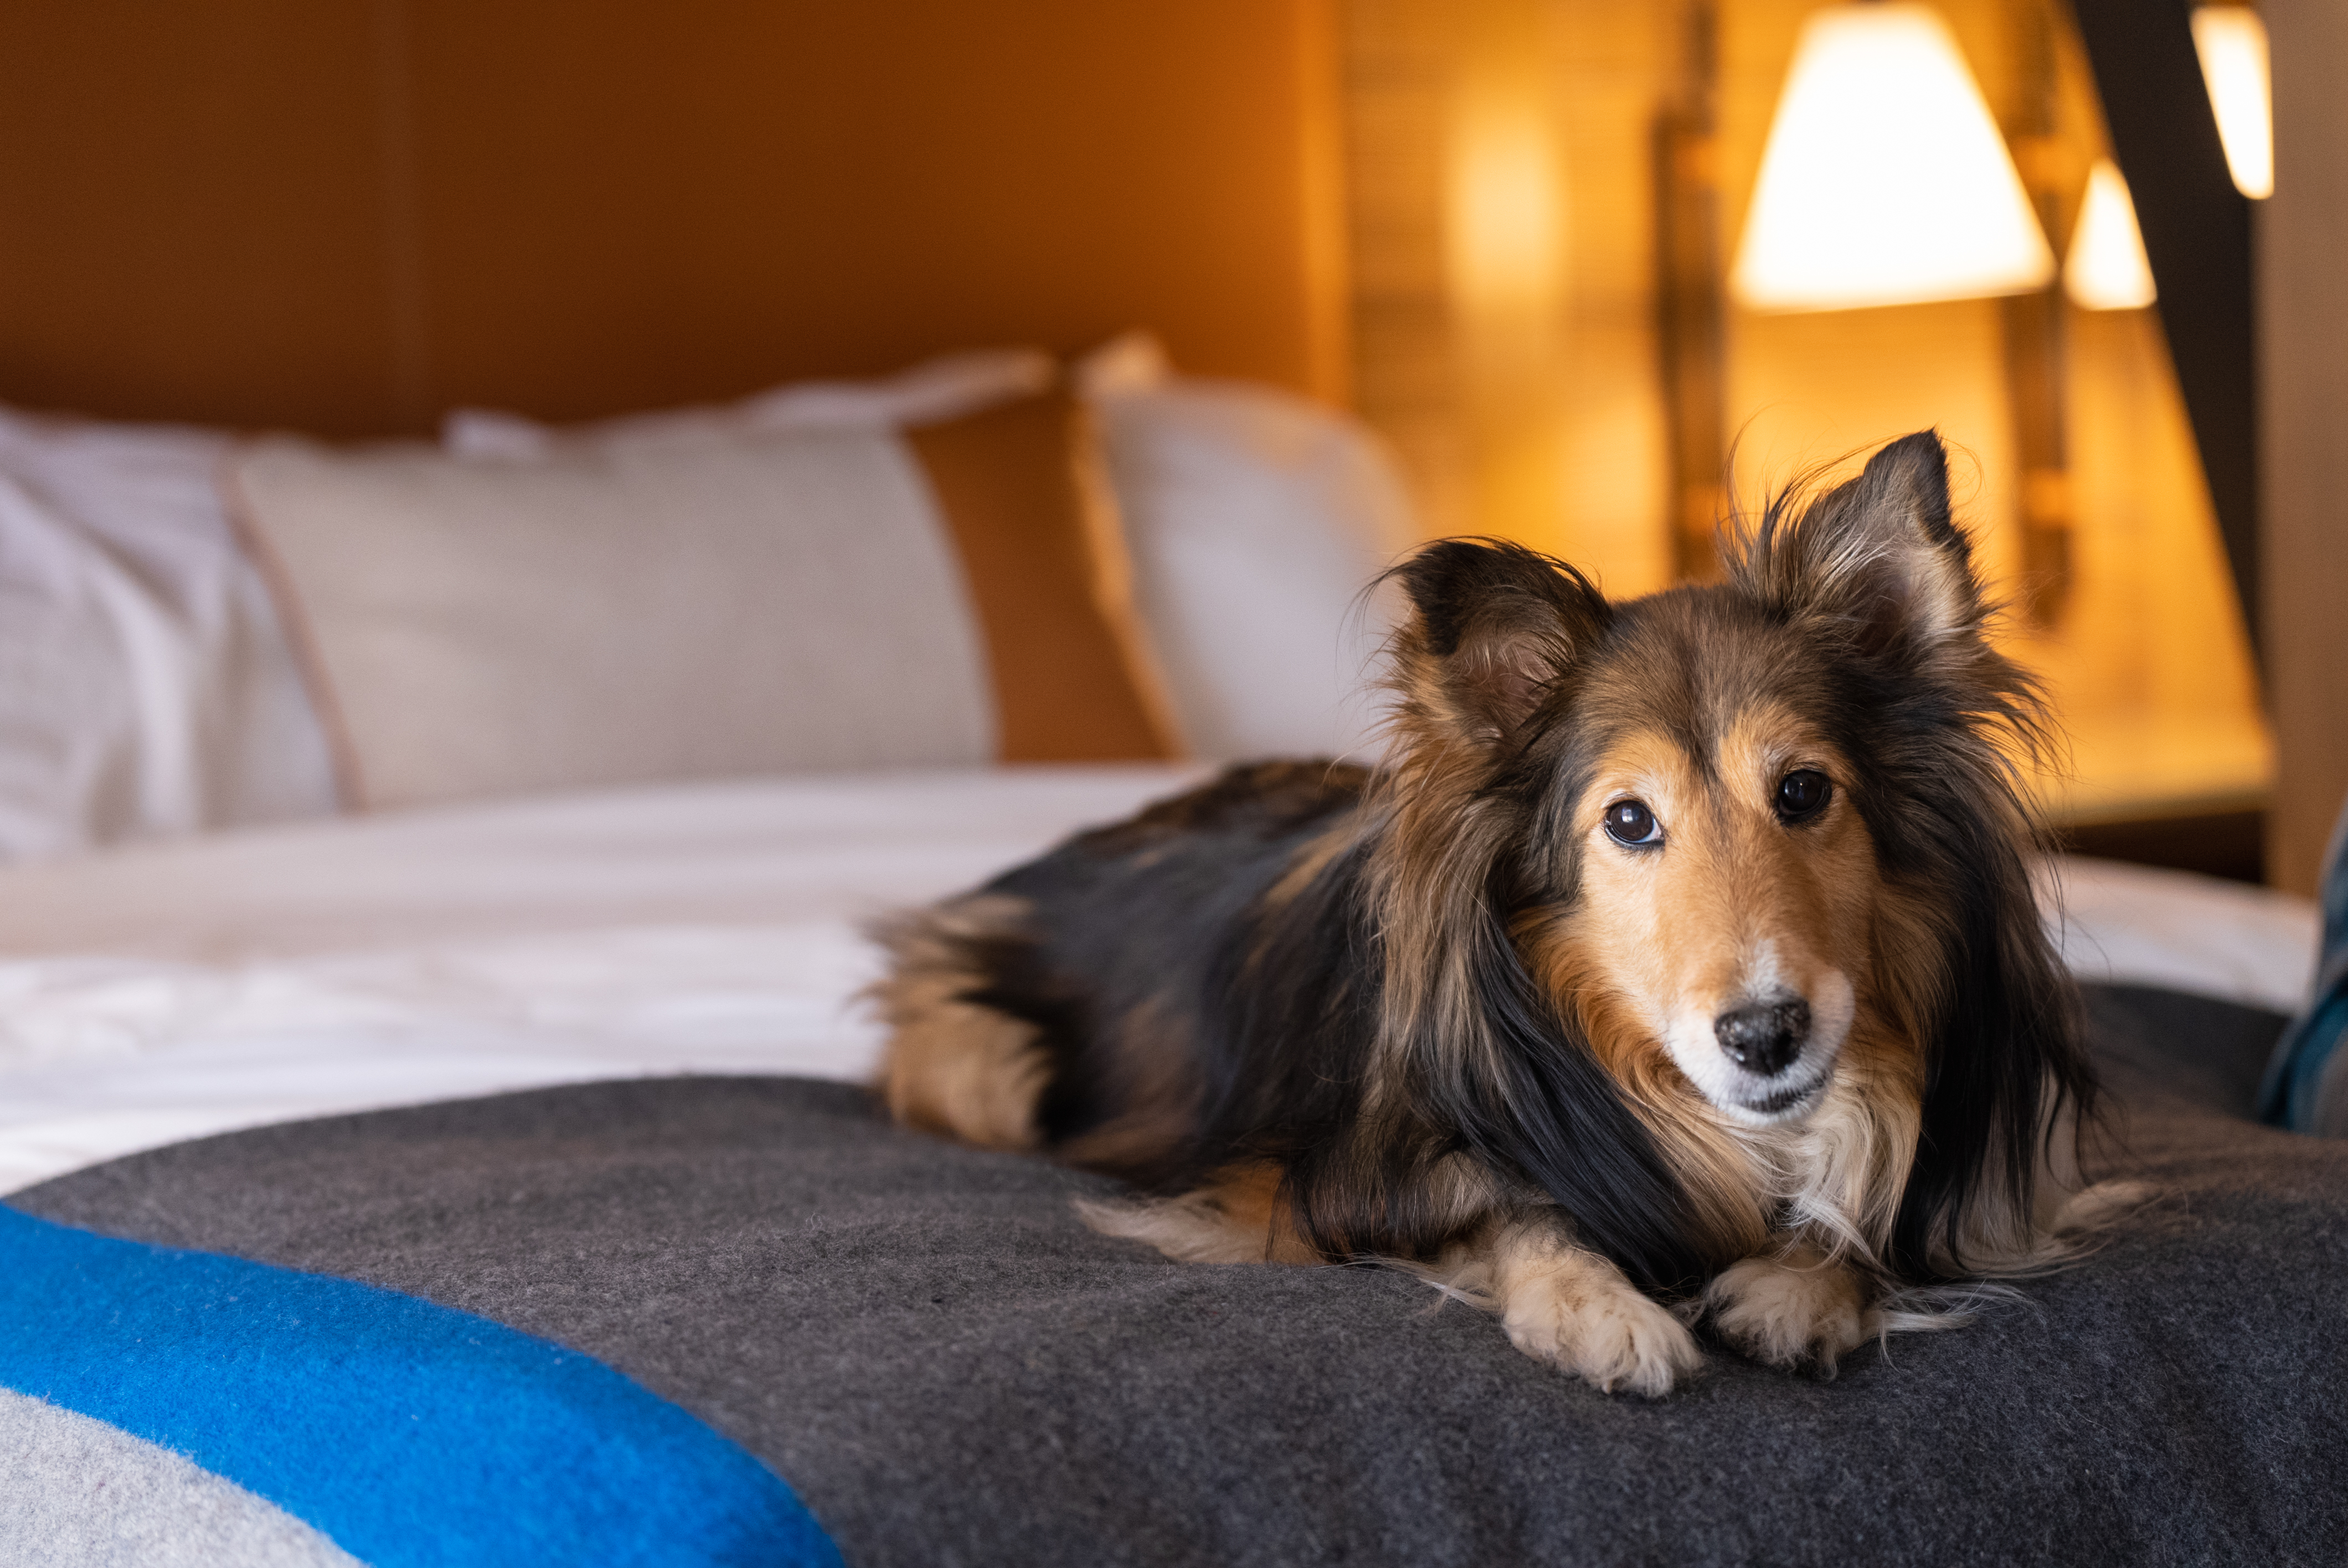 A dog is lying on a bed covered with a blanket in a cozy, warmly lit room with a lamp in the background.